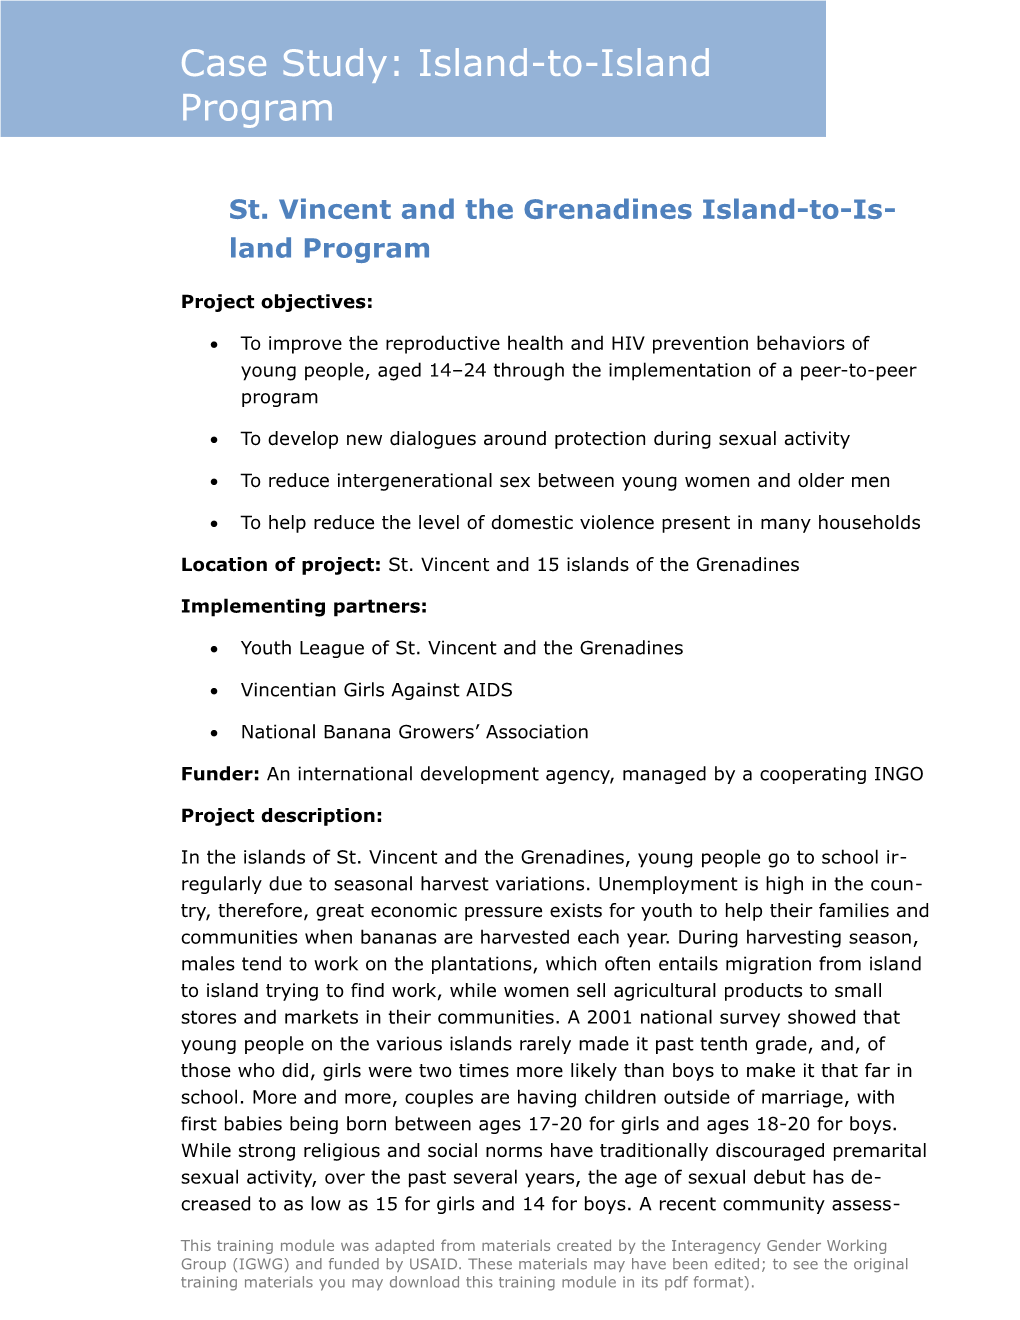 St. Vincent and the Grenadines Island-To-Island Program